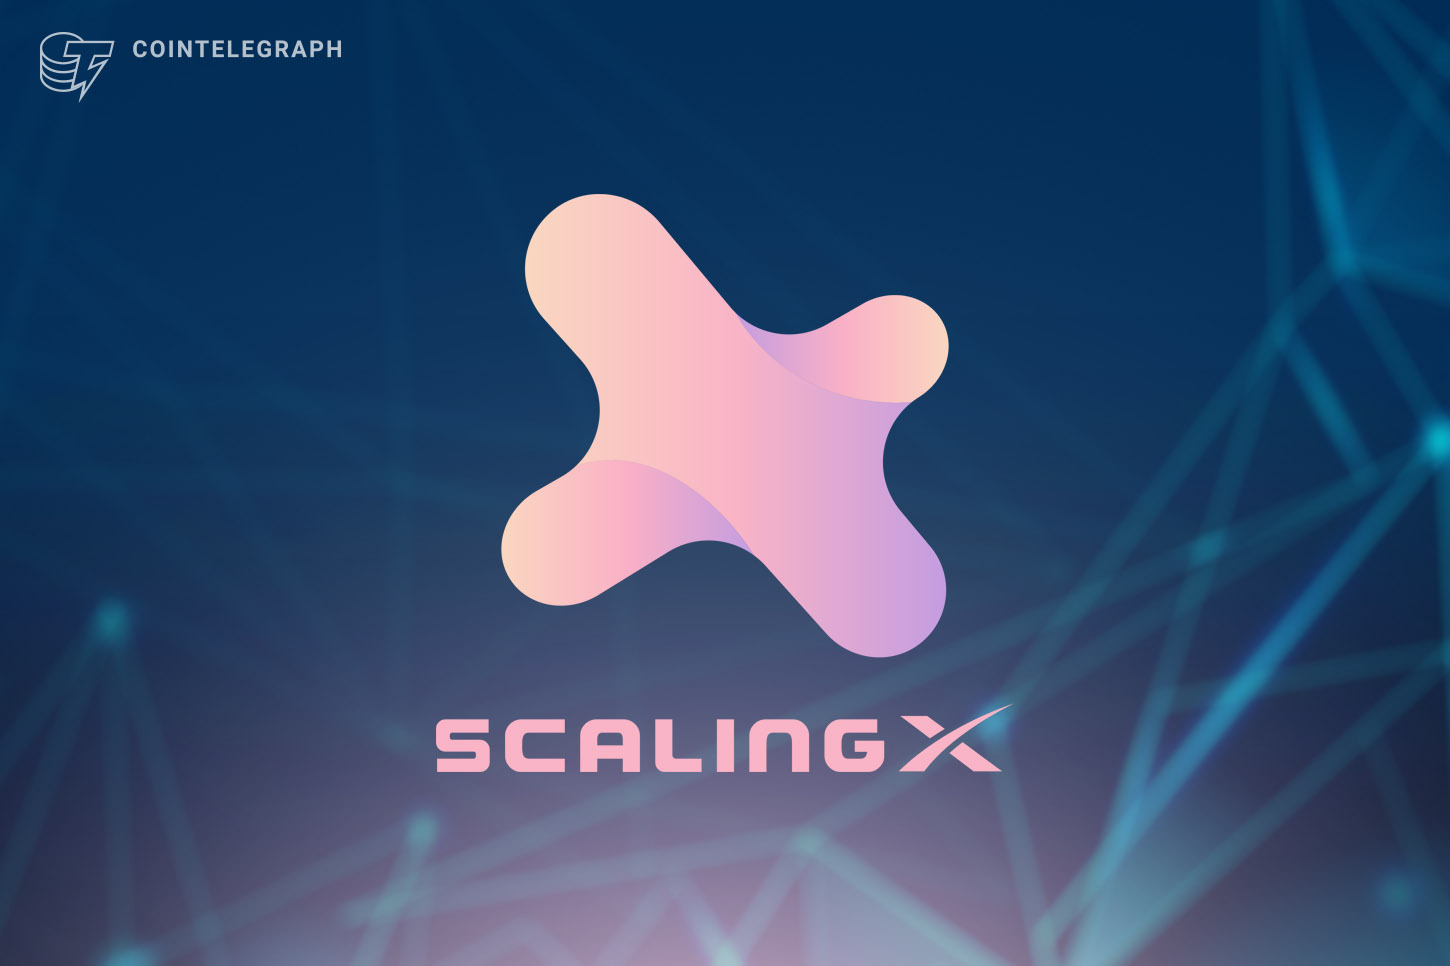 ScalingX launches $20M for Web3 accelerator and hackathon